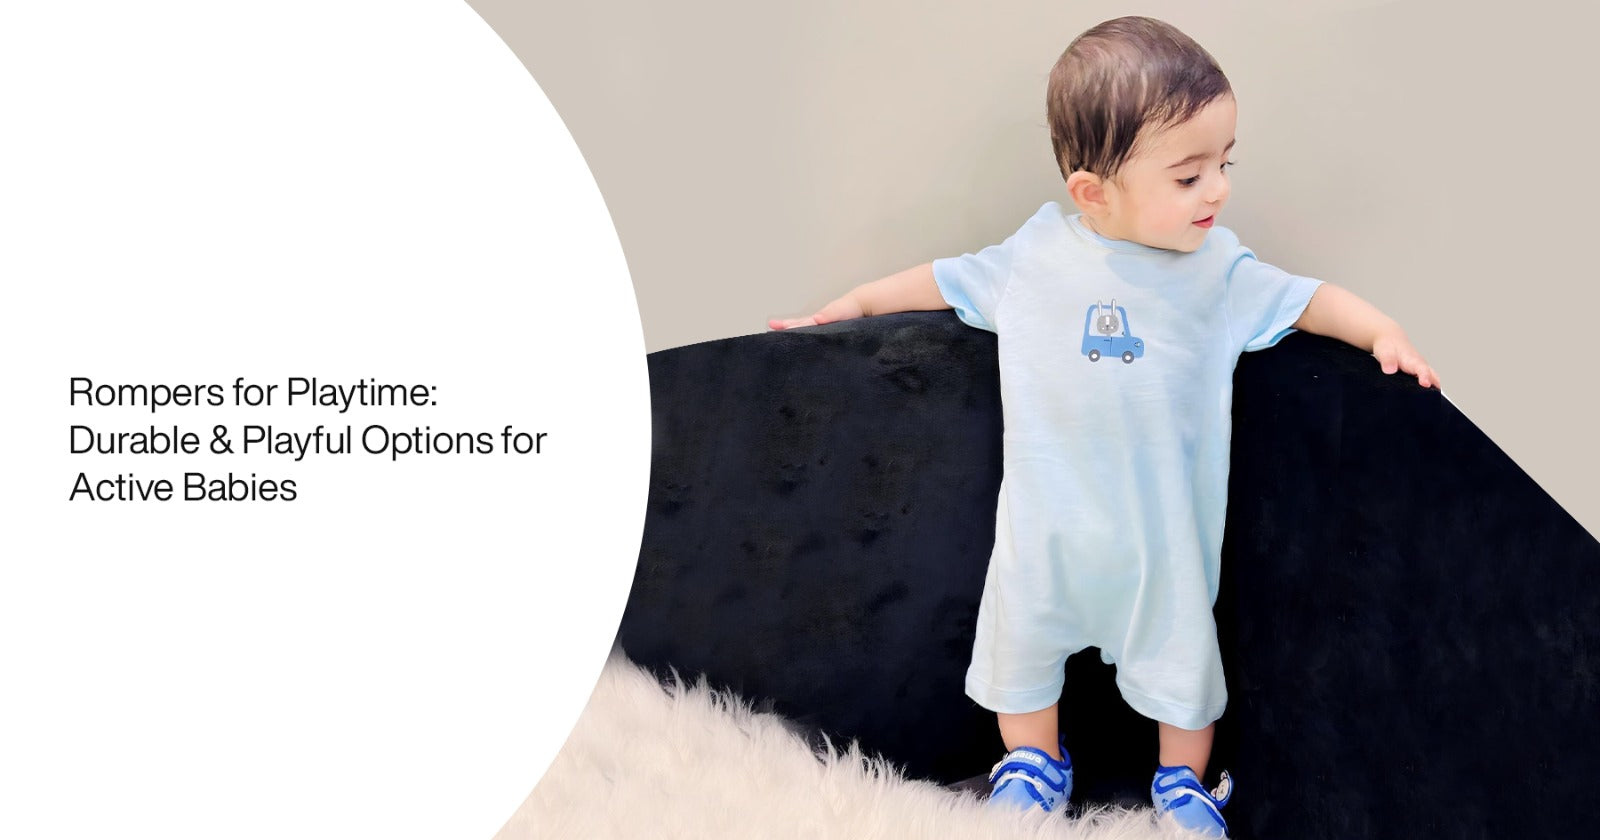 Rompers for Playtime: Durable & Playful Options for Active Babies